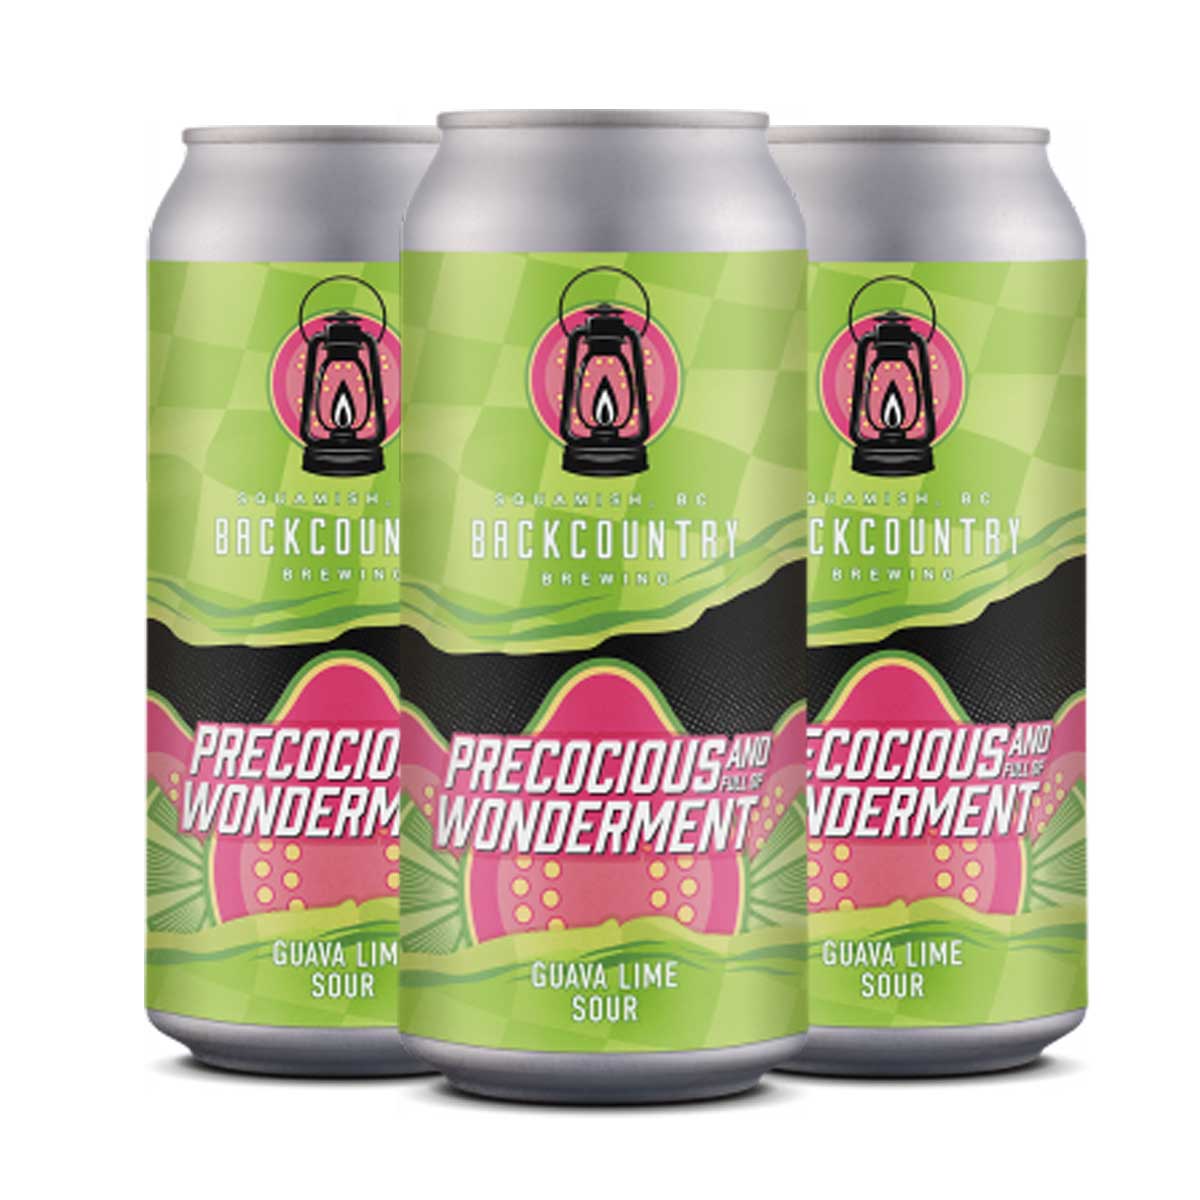 TAG Liquor Stores BC - Backcountry Brewing "Precious and full of wonderment" Guava Lime Sour 4 Pack Cans